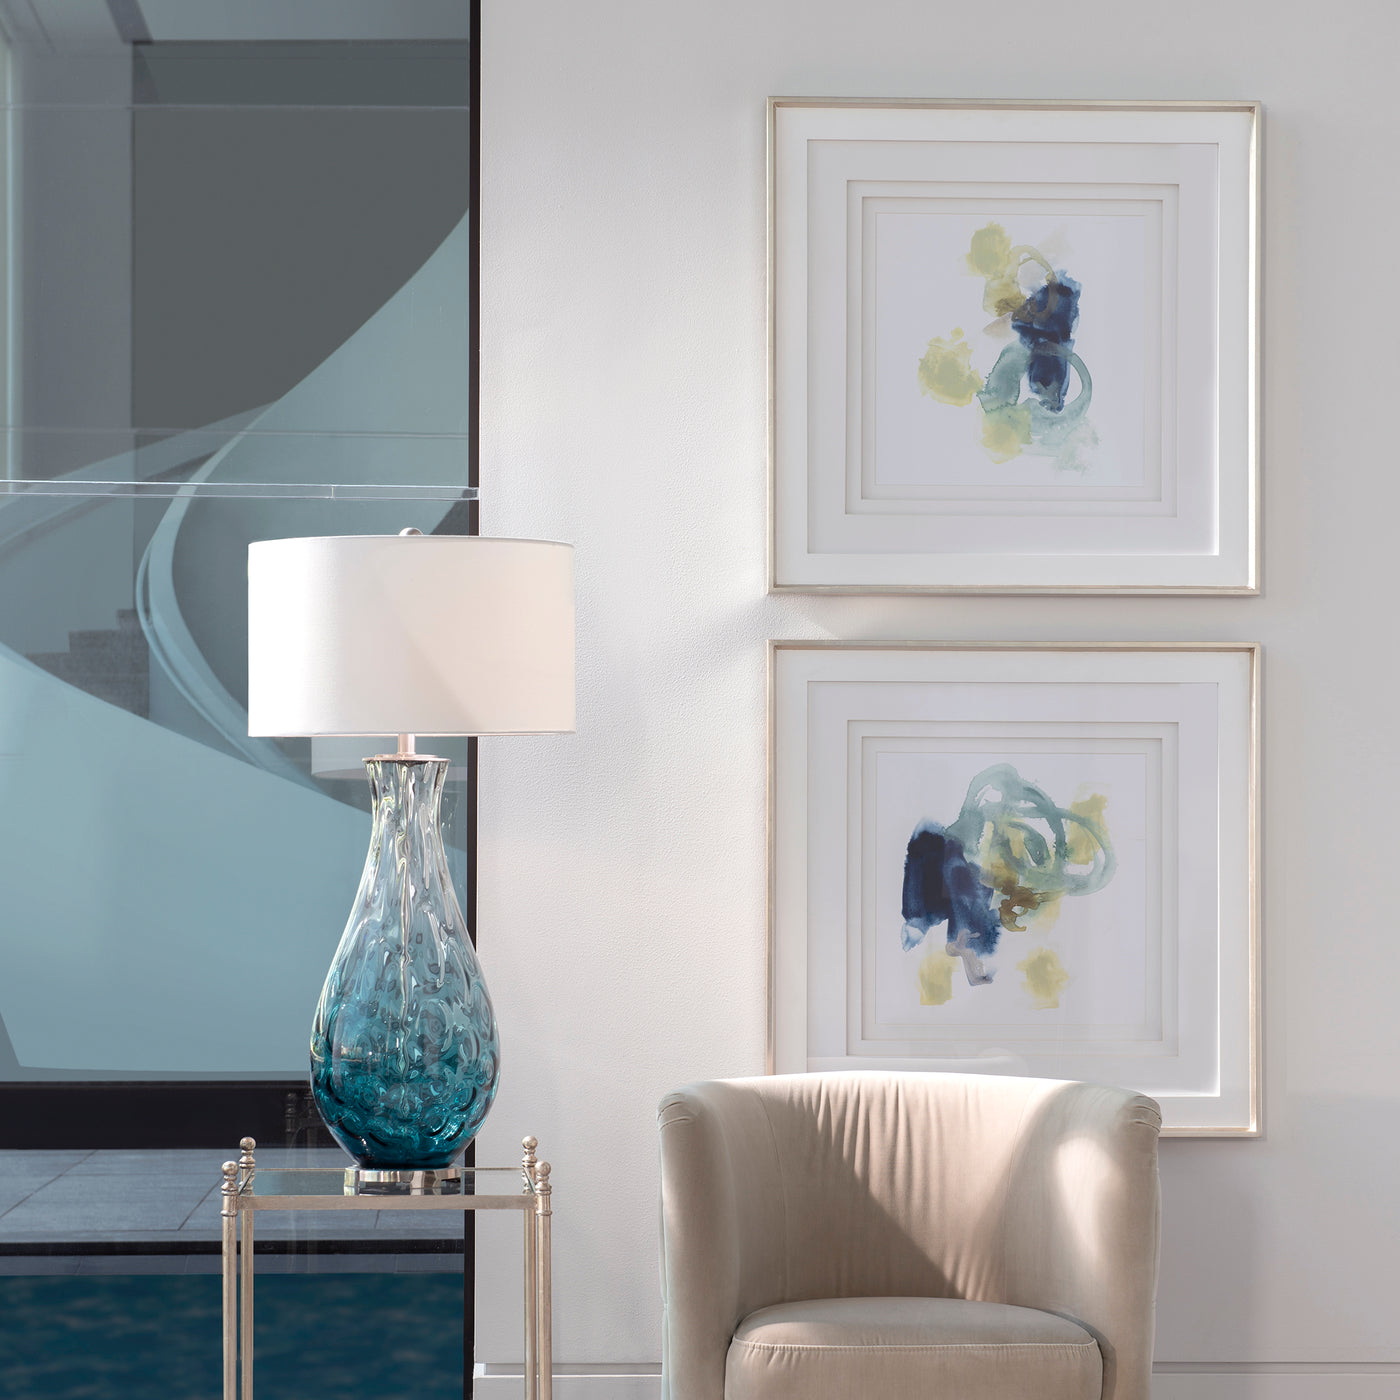 These Contemporary Abstract Prints Showcase Watercolor Tones Of Teal, Royal Blue, And Yellow-green Against A Bright White ...